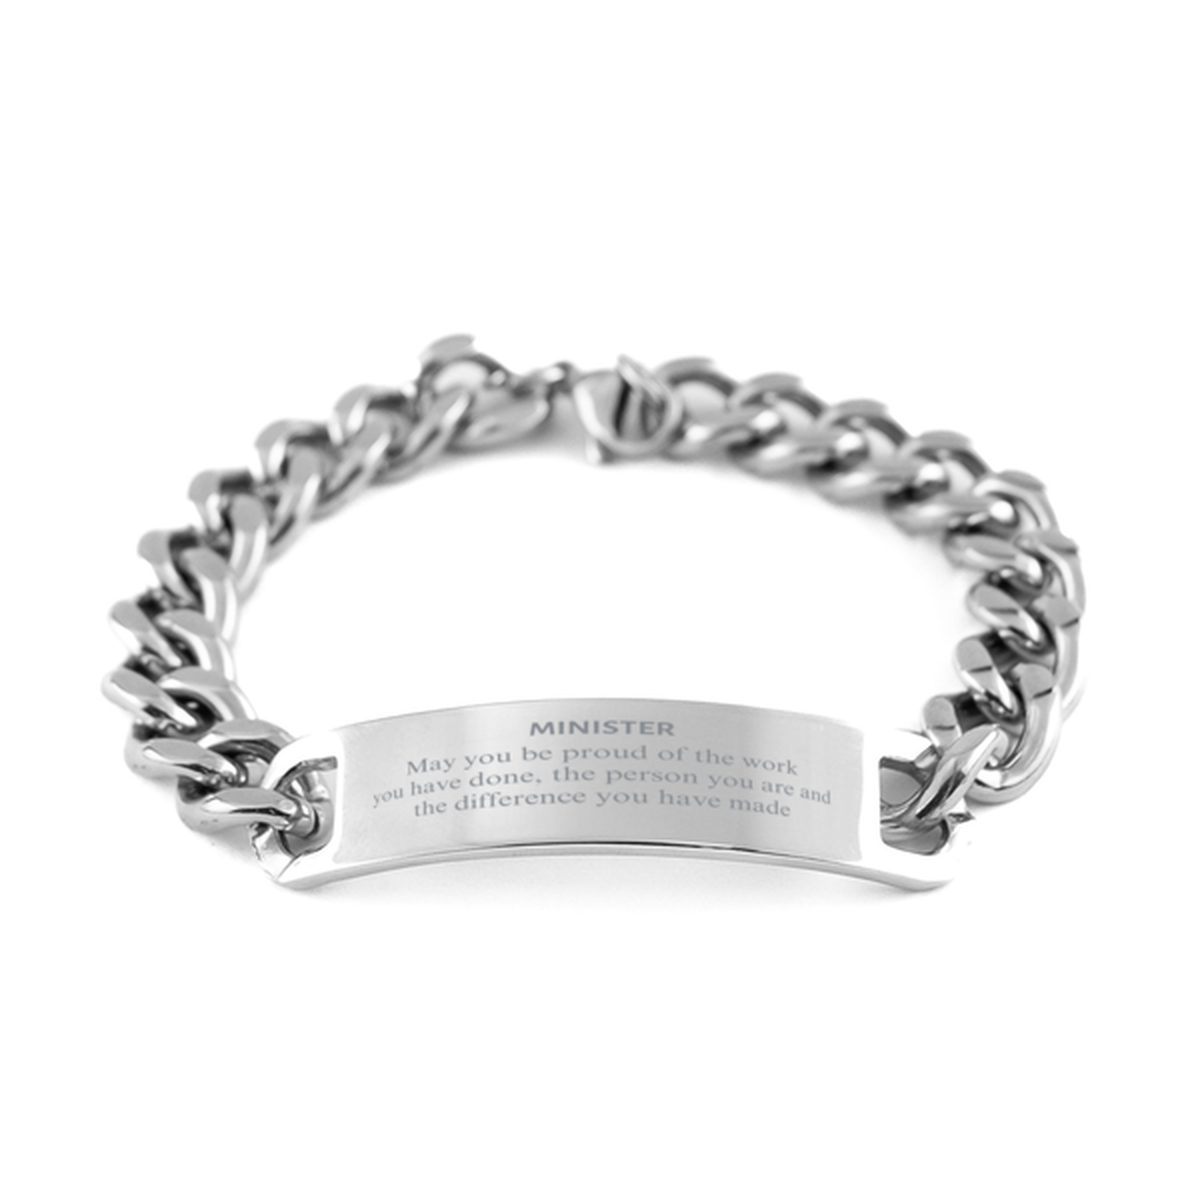 Minister May you be proud of the work you have done, Retirement Minister Cuban Chain Stainless Steel Bracelet for Colleague Appreciation Gifts Amazing for Minister